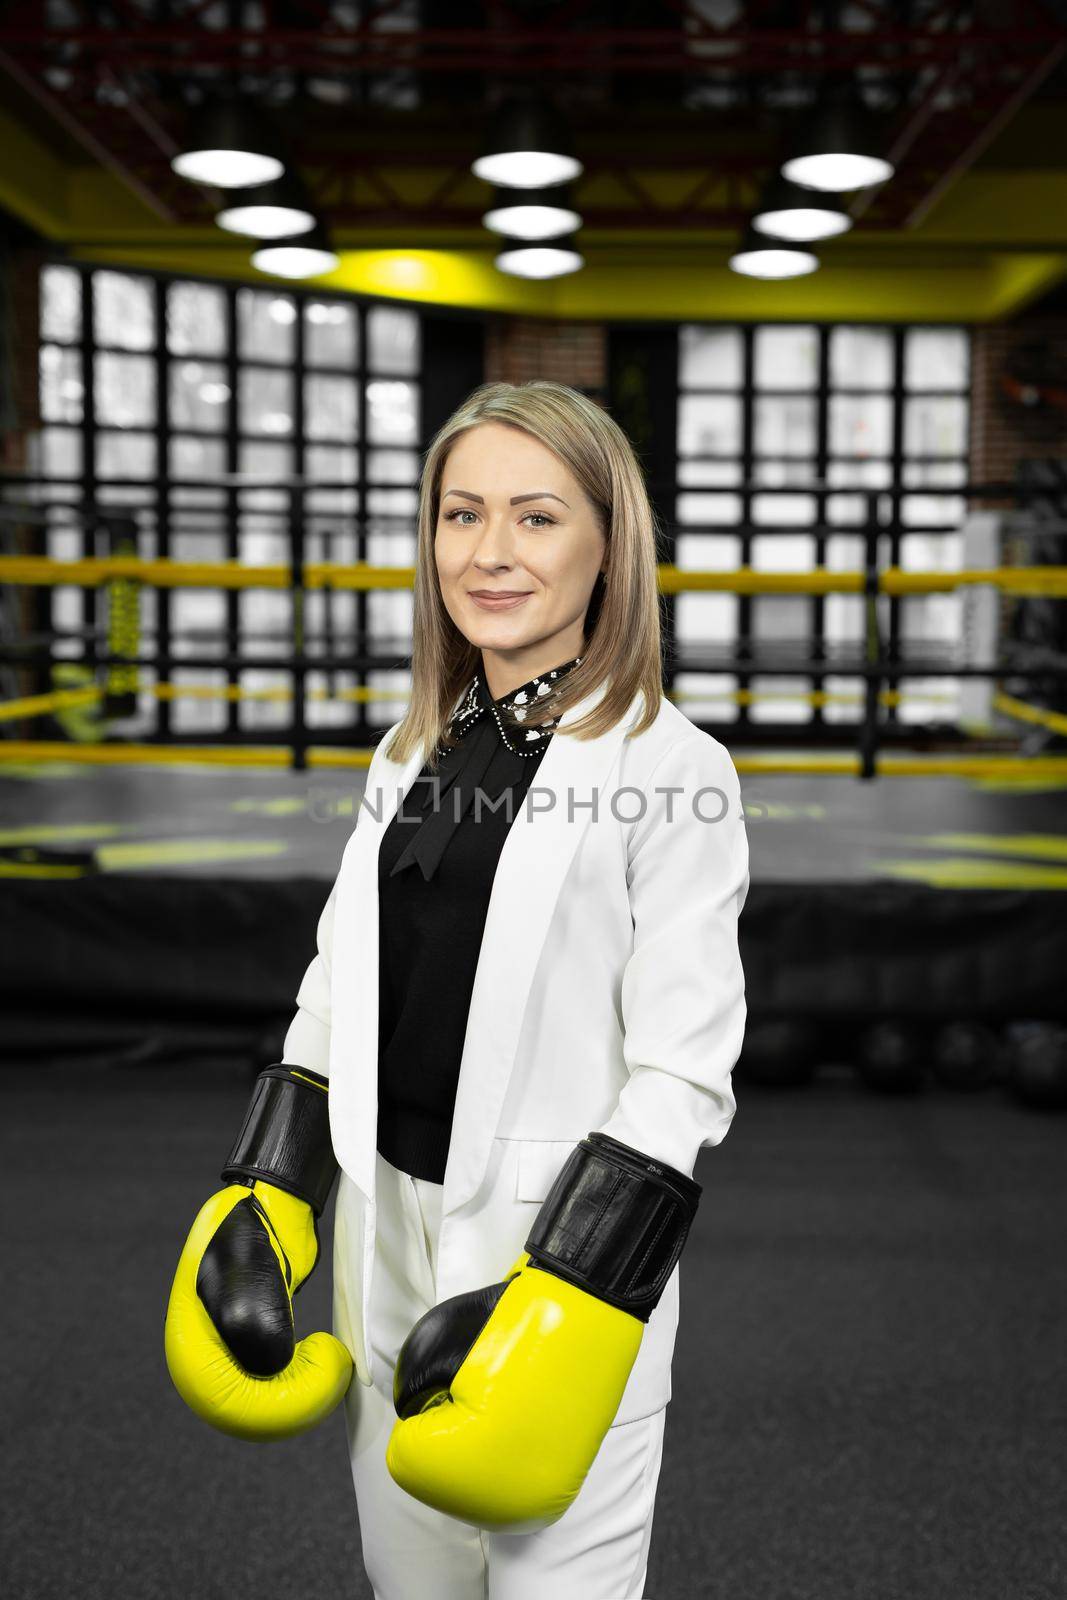 Portrait of a business woman in yellow boxing gloves on the background of a boxing ring